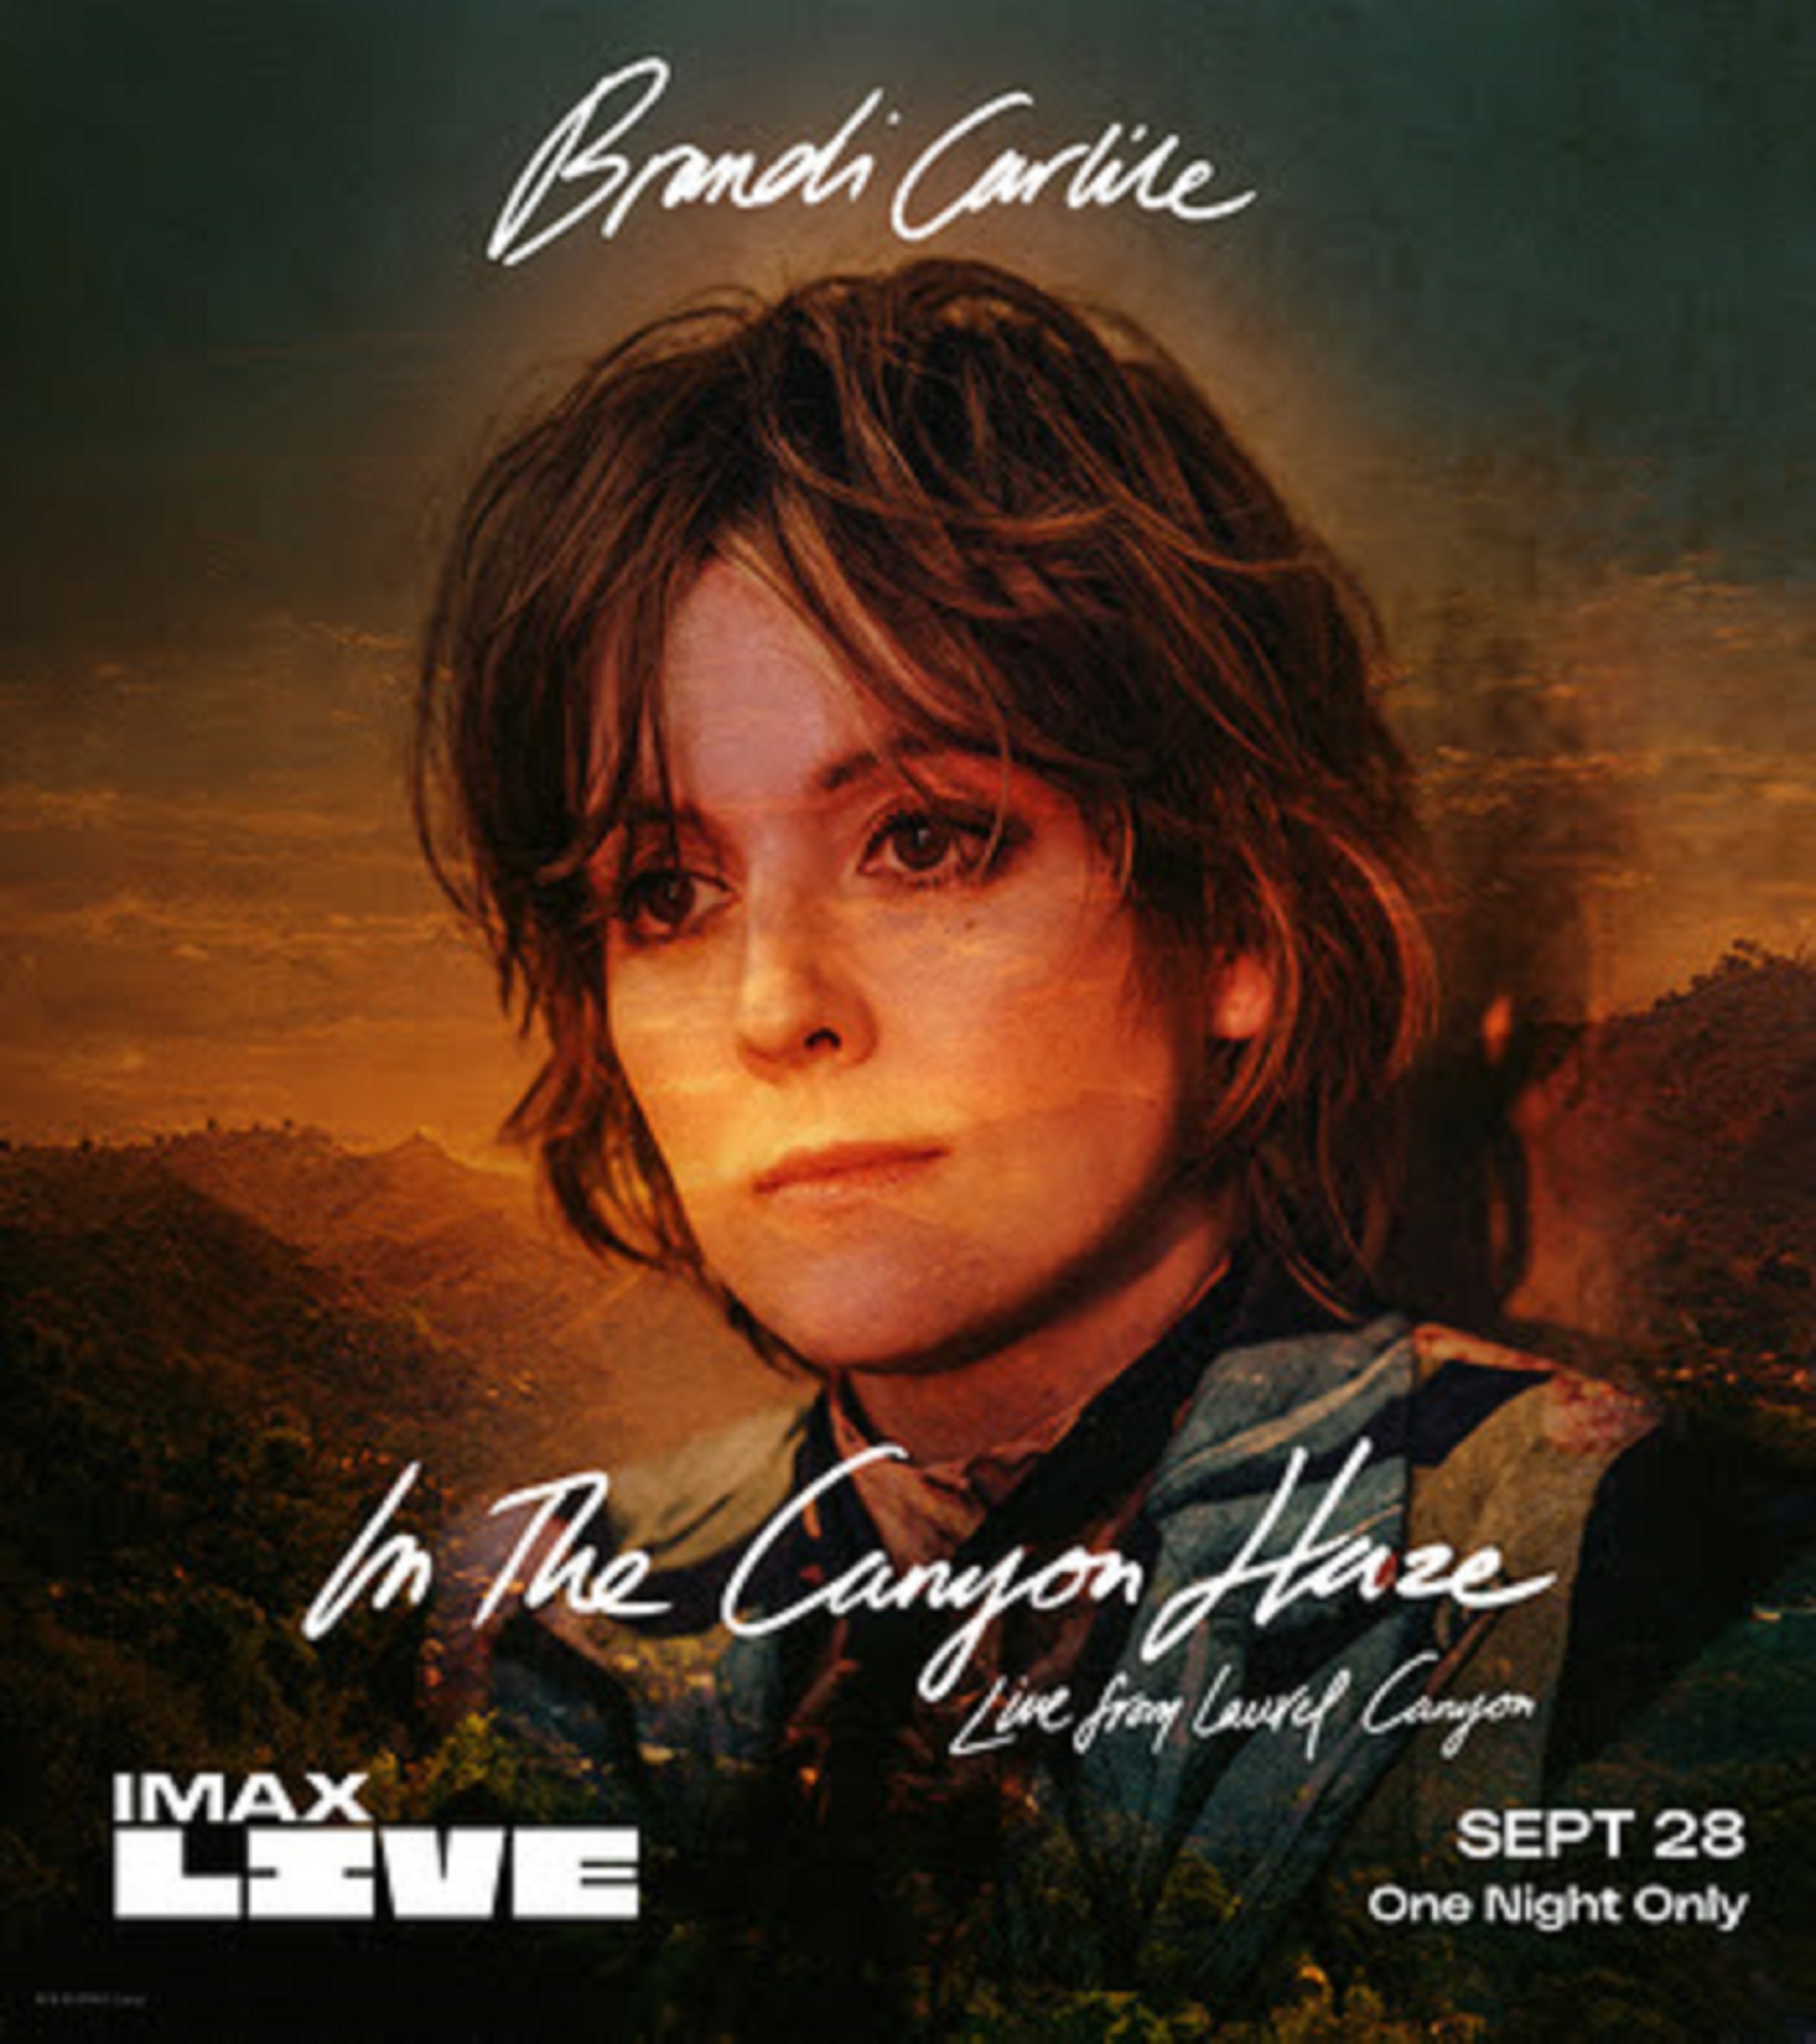 Brandi Carlile confirms exclusive IMAX Live concert experience “Brandi Carlile: In The Canyon Haze - Live from Laurel Canyon” on September 28